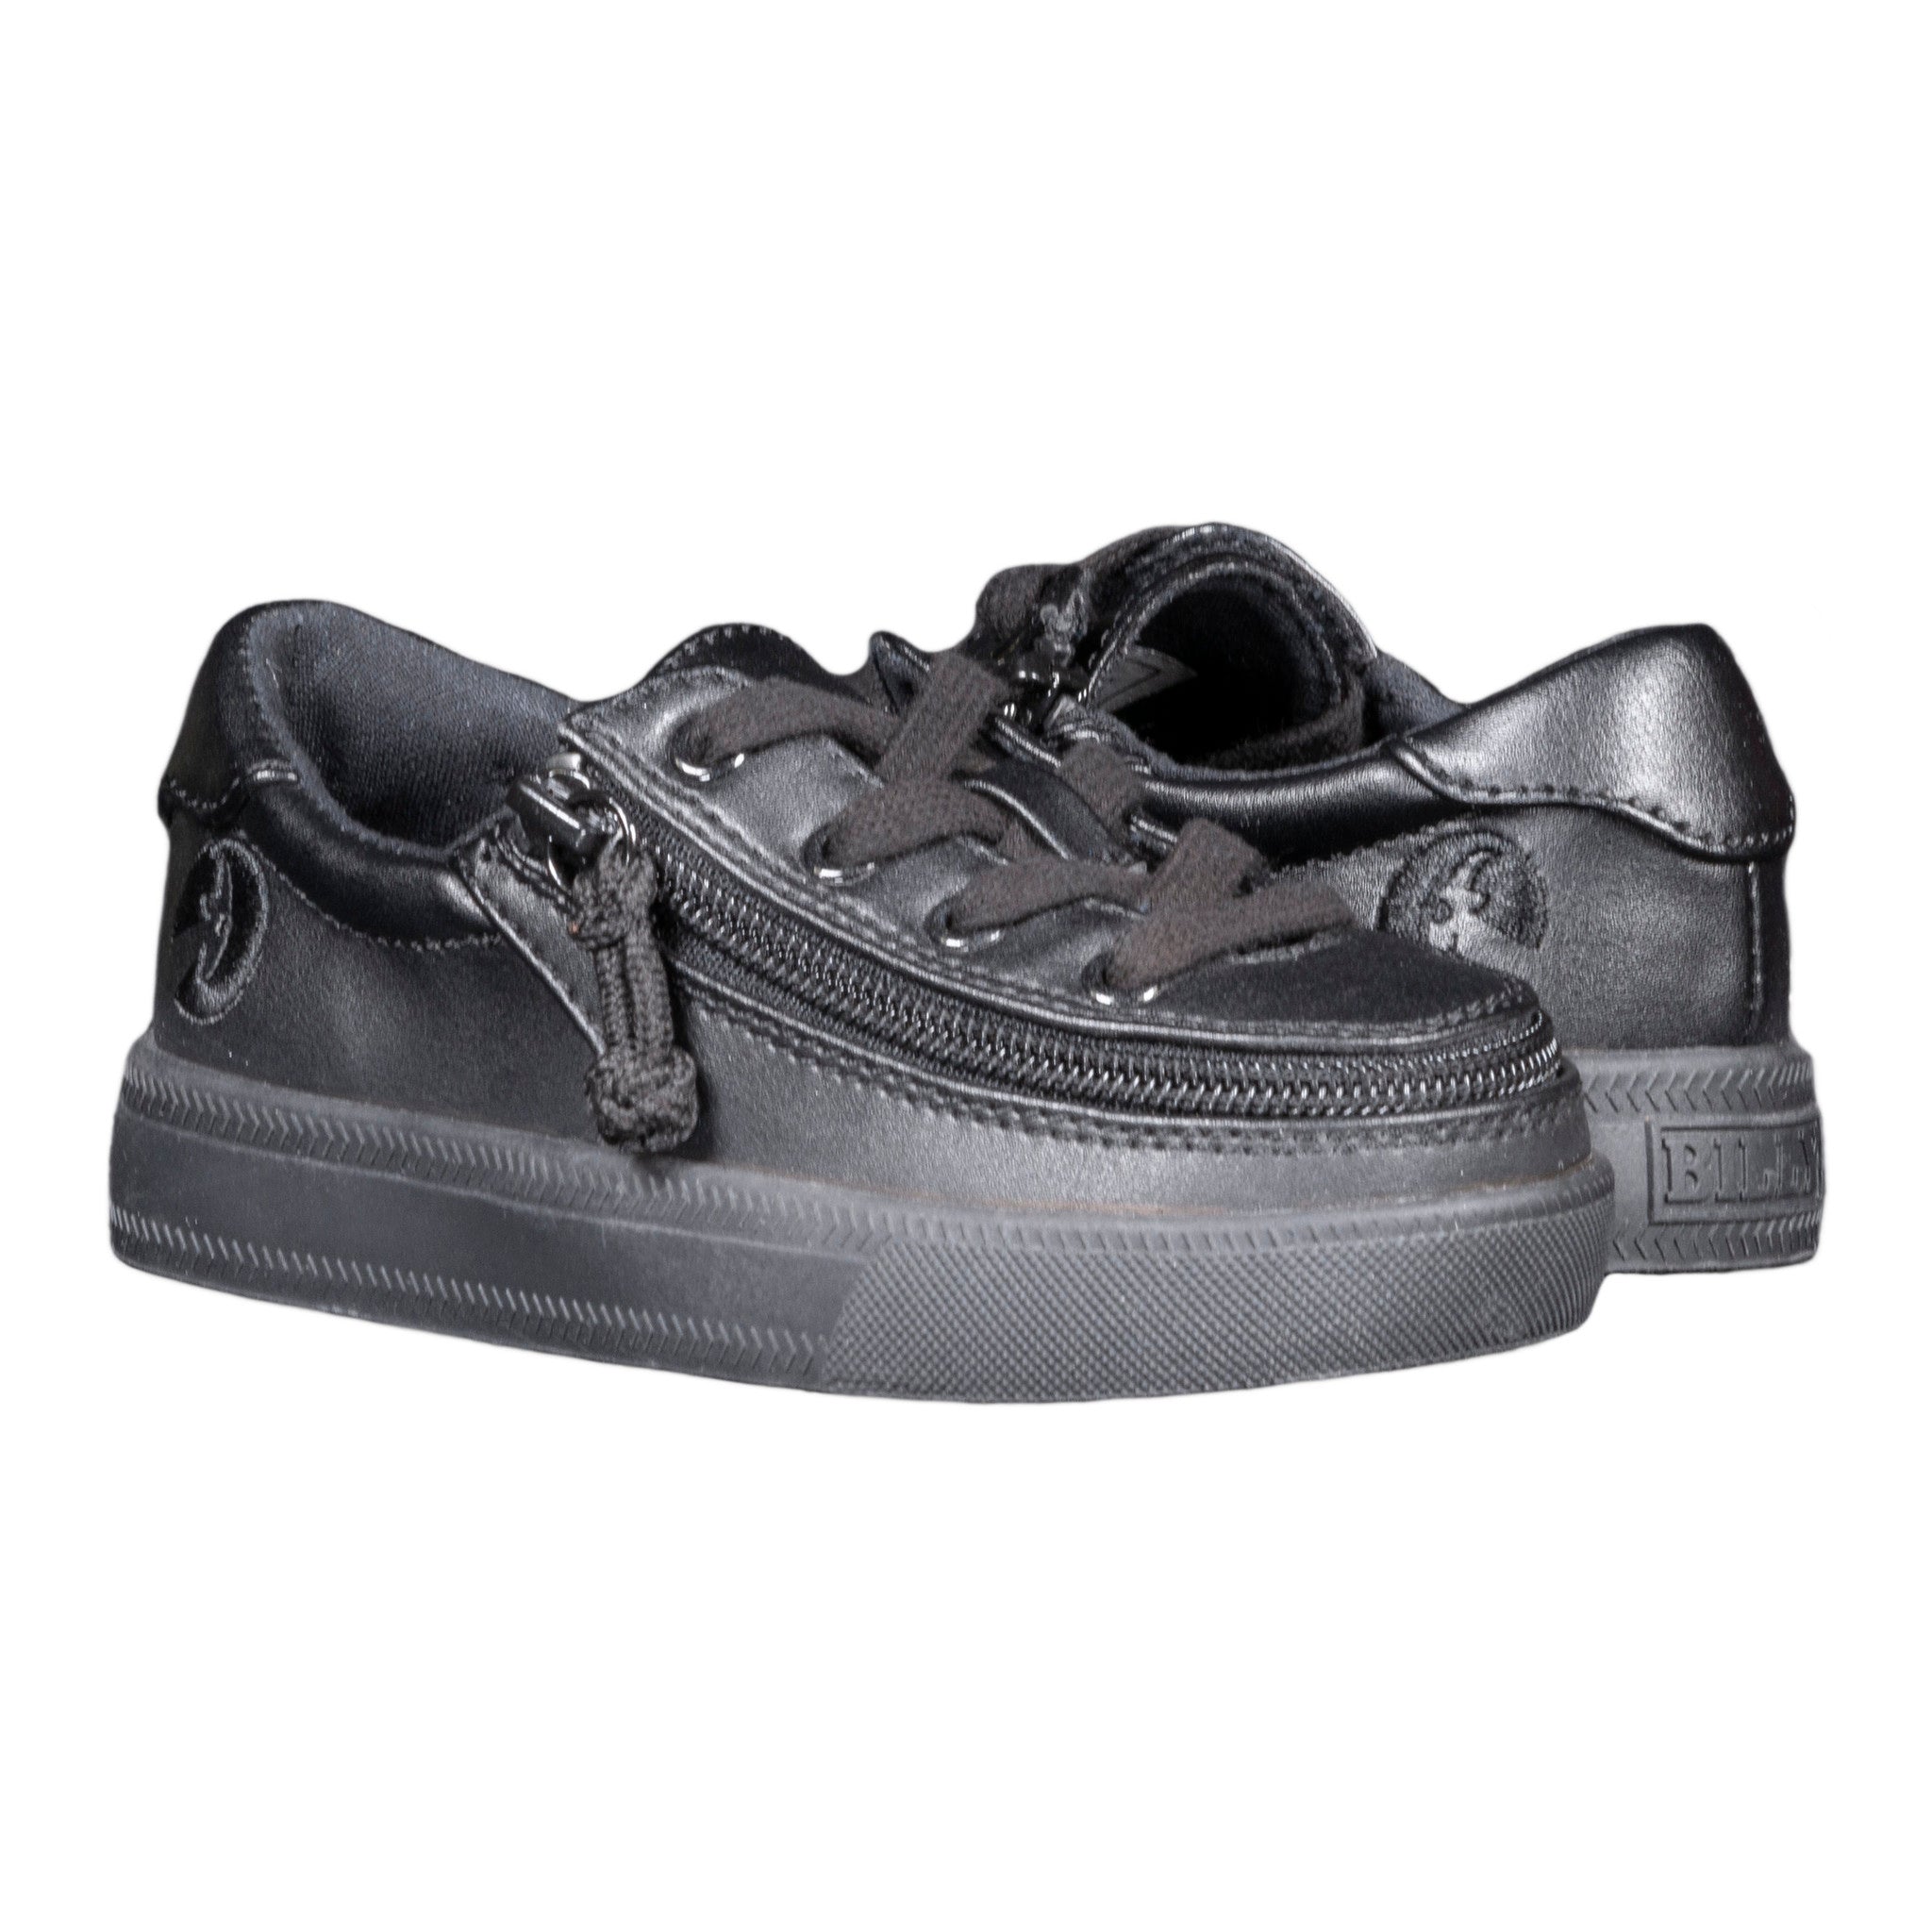 Billy Footwear (Toddlers)- Low Top Black Faux Leather Shoes CLEARANCE